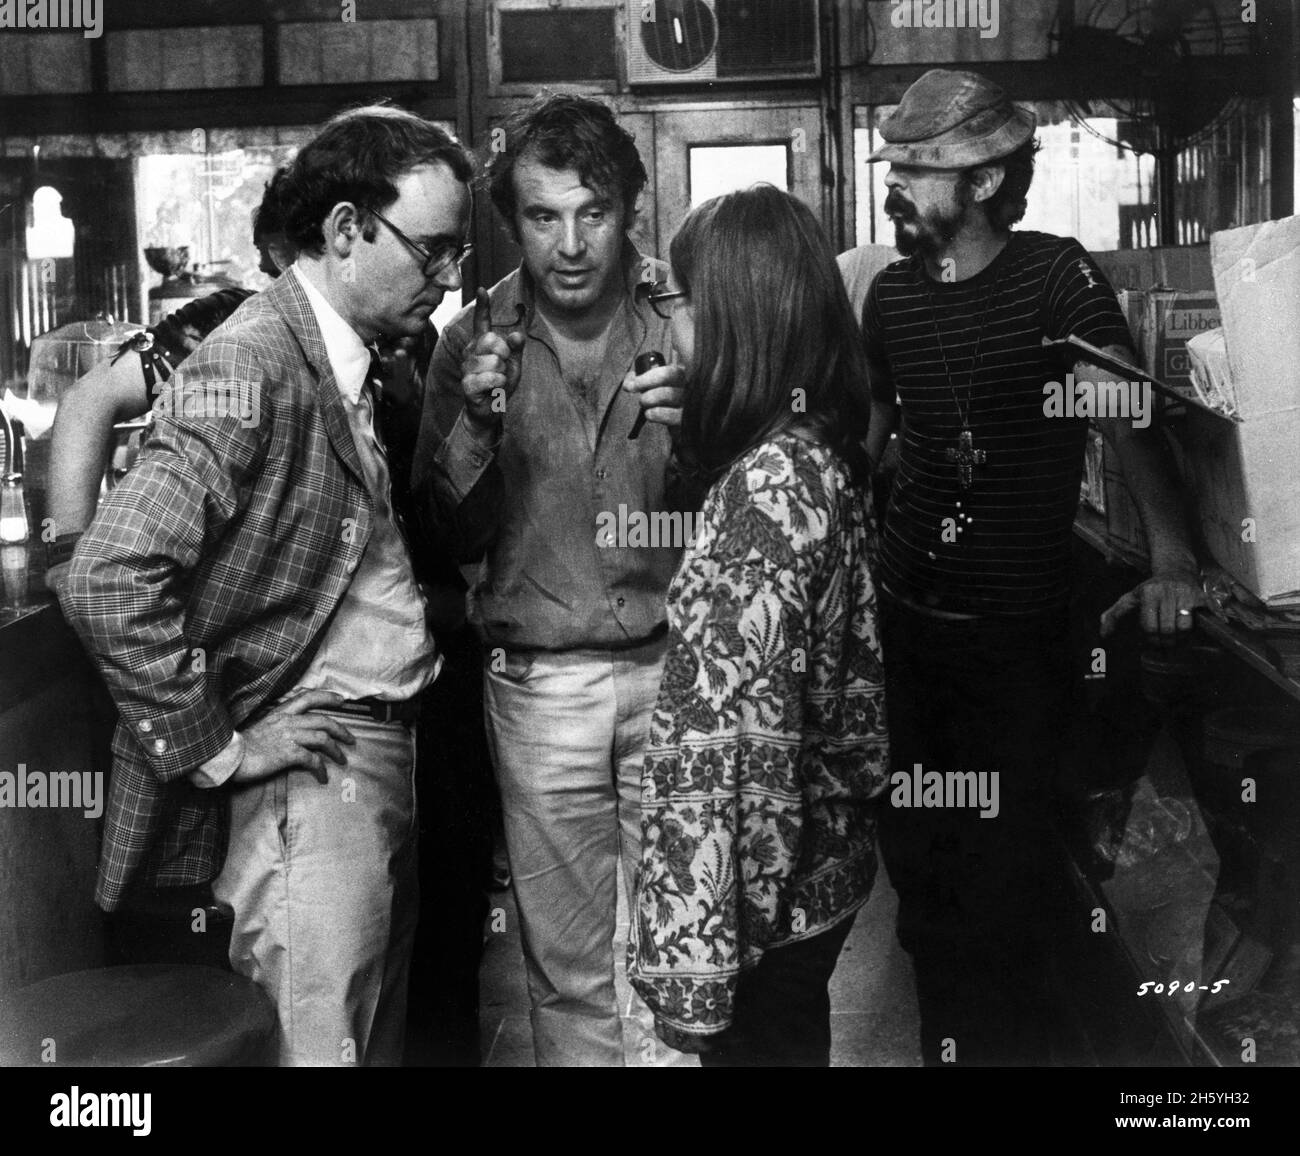 Czech Director MILOS FORMAN (centre with pipe) directing BUCK HENRY and GAIL BUSMAN on set candid during filming of TAKING OFF 1971 director MILOS FORMAN Crown-Hausman / Forman Production / Renn Productions / Universal Pictures Stock Photo